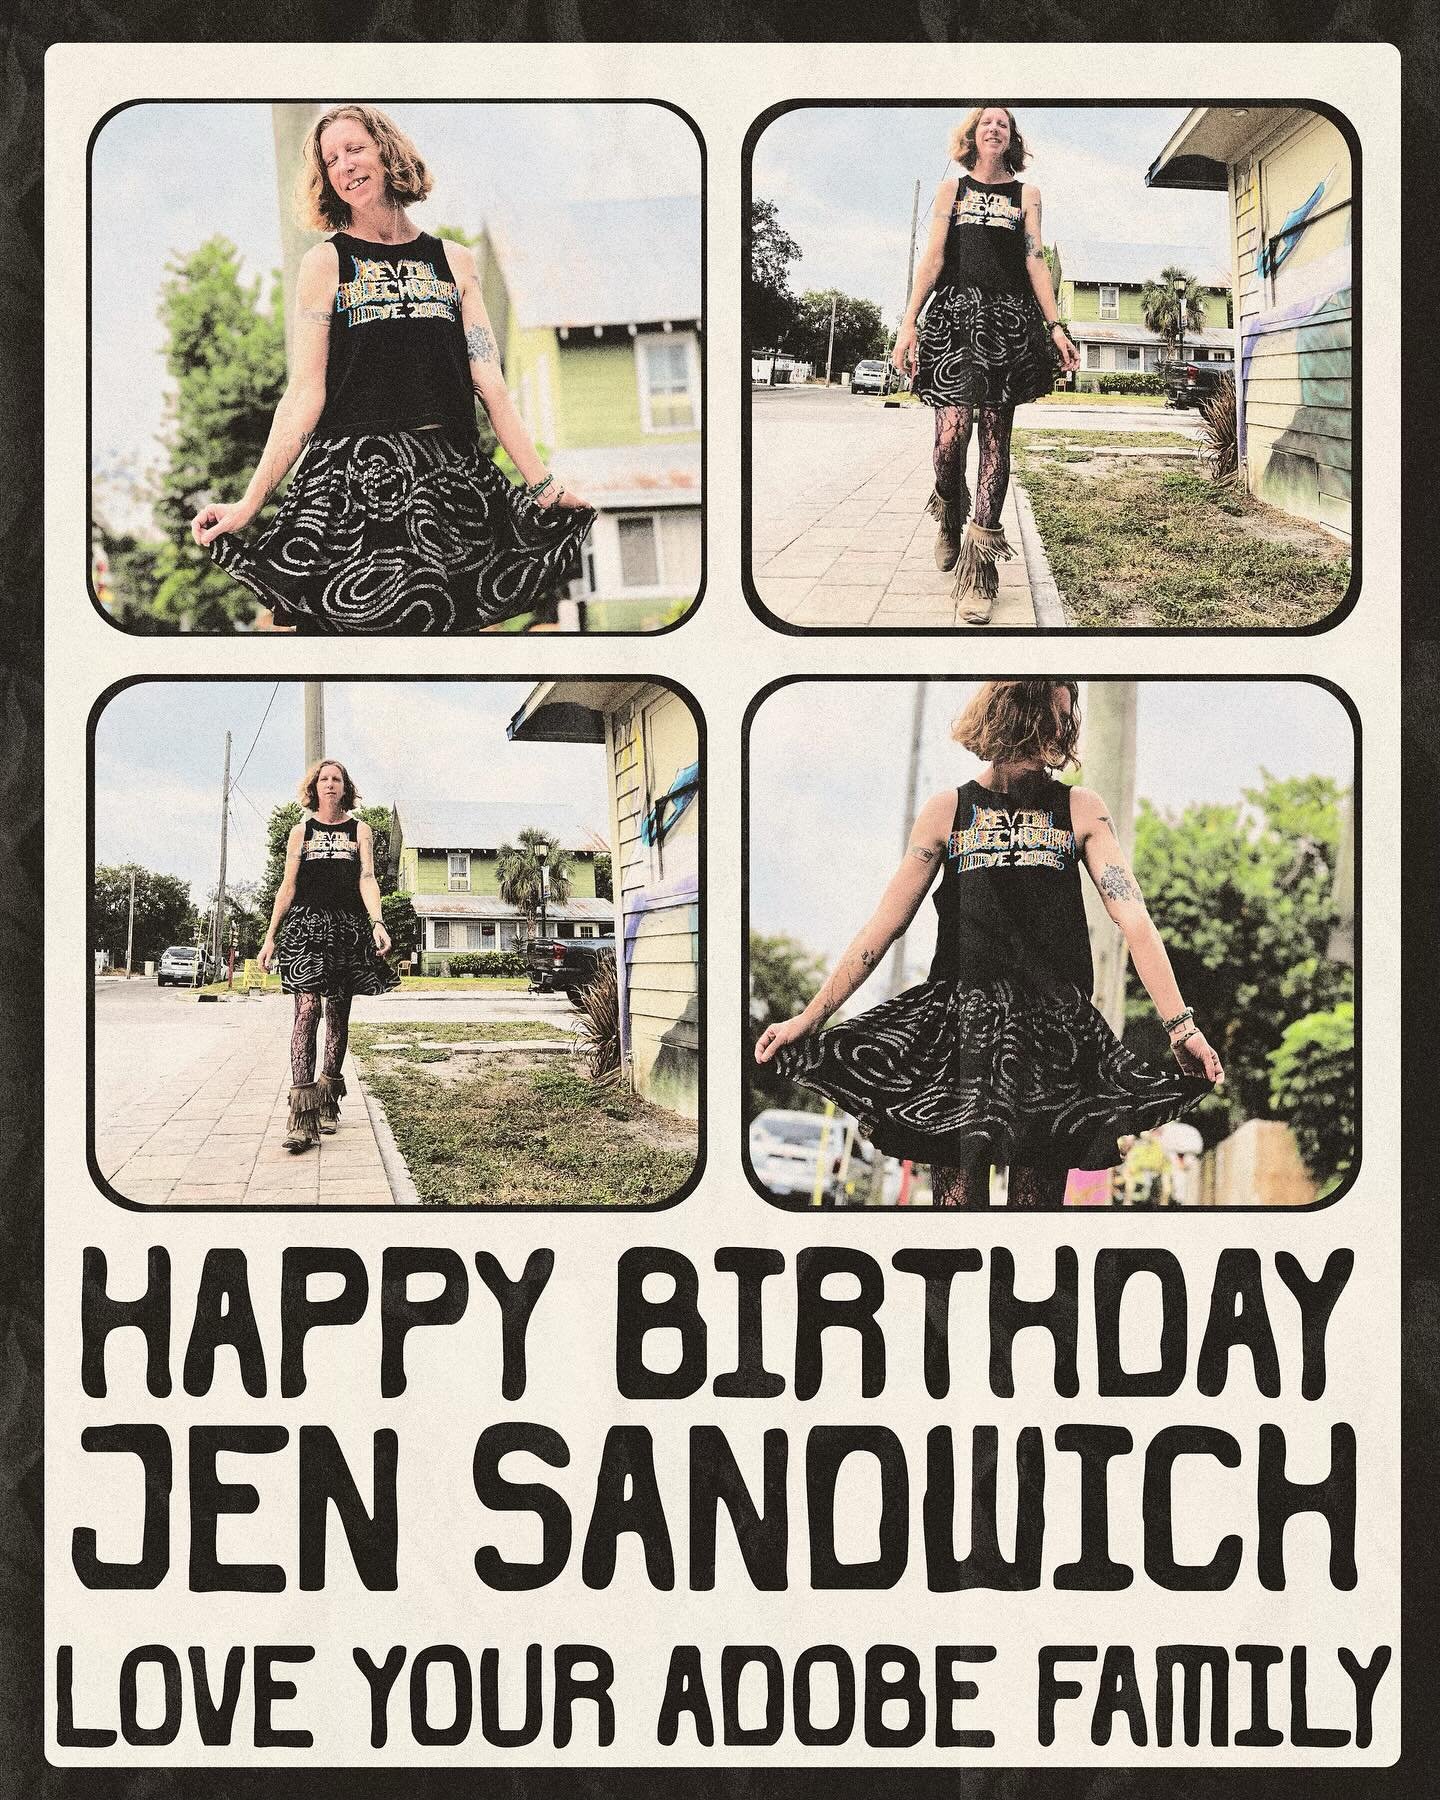 🥳Happiest Birthday to our coffee queen!!! Who wears the coolest outfits, designs the cutest zines, is a vinyl music zealot and will truly appreciate the song choice for this post😂🎂🎈🤗 We Love You, Jen!!!! 
#happybirthday #kavalove #drinkkava #kav